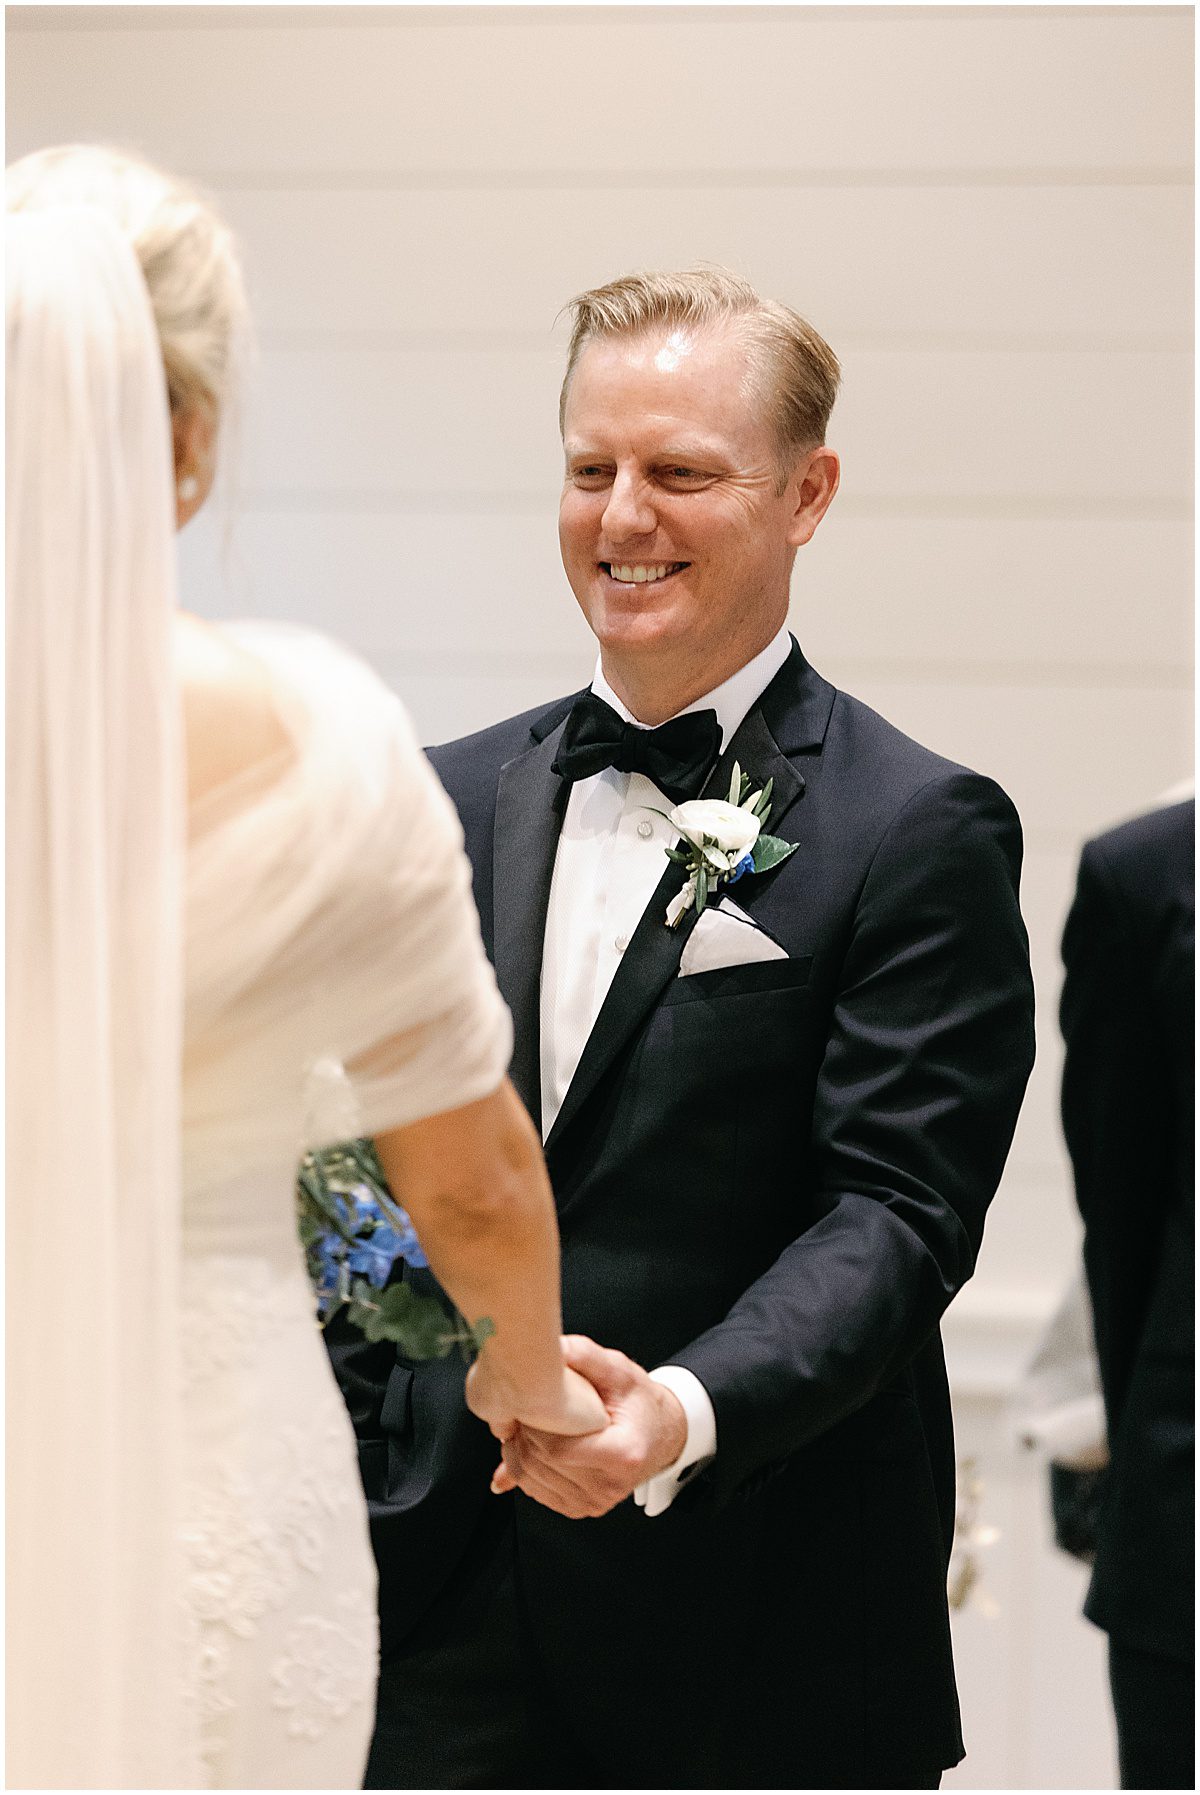 Groom Smiling During Ceremony Photo